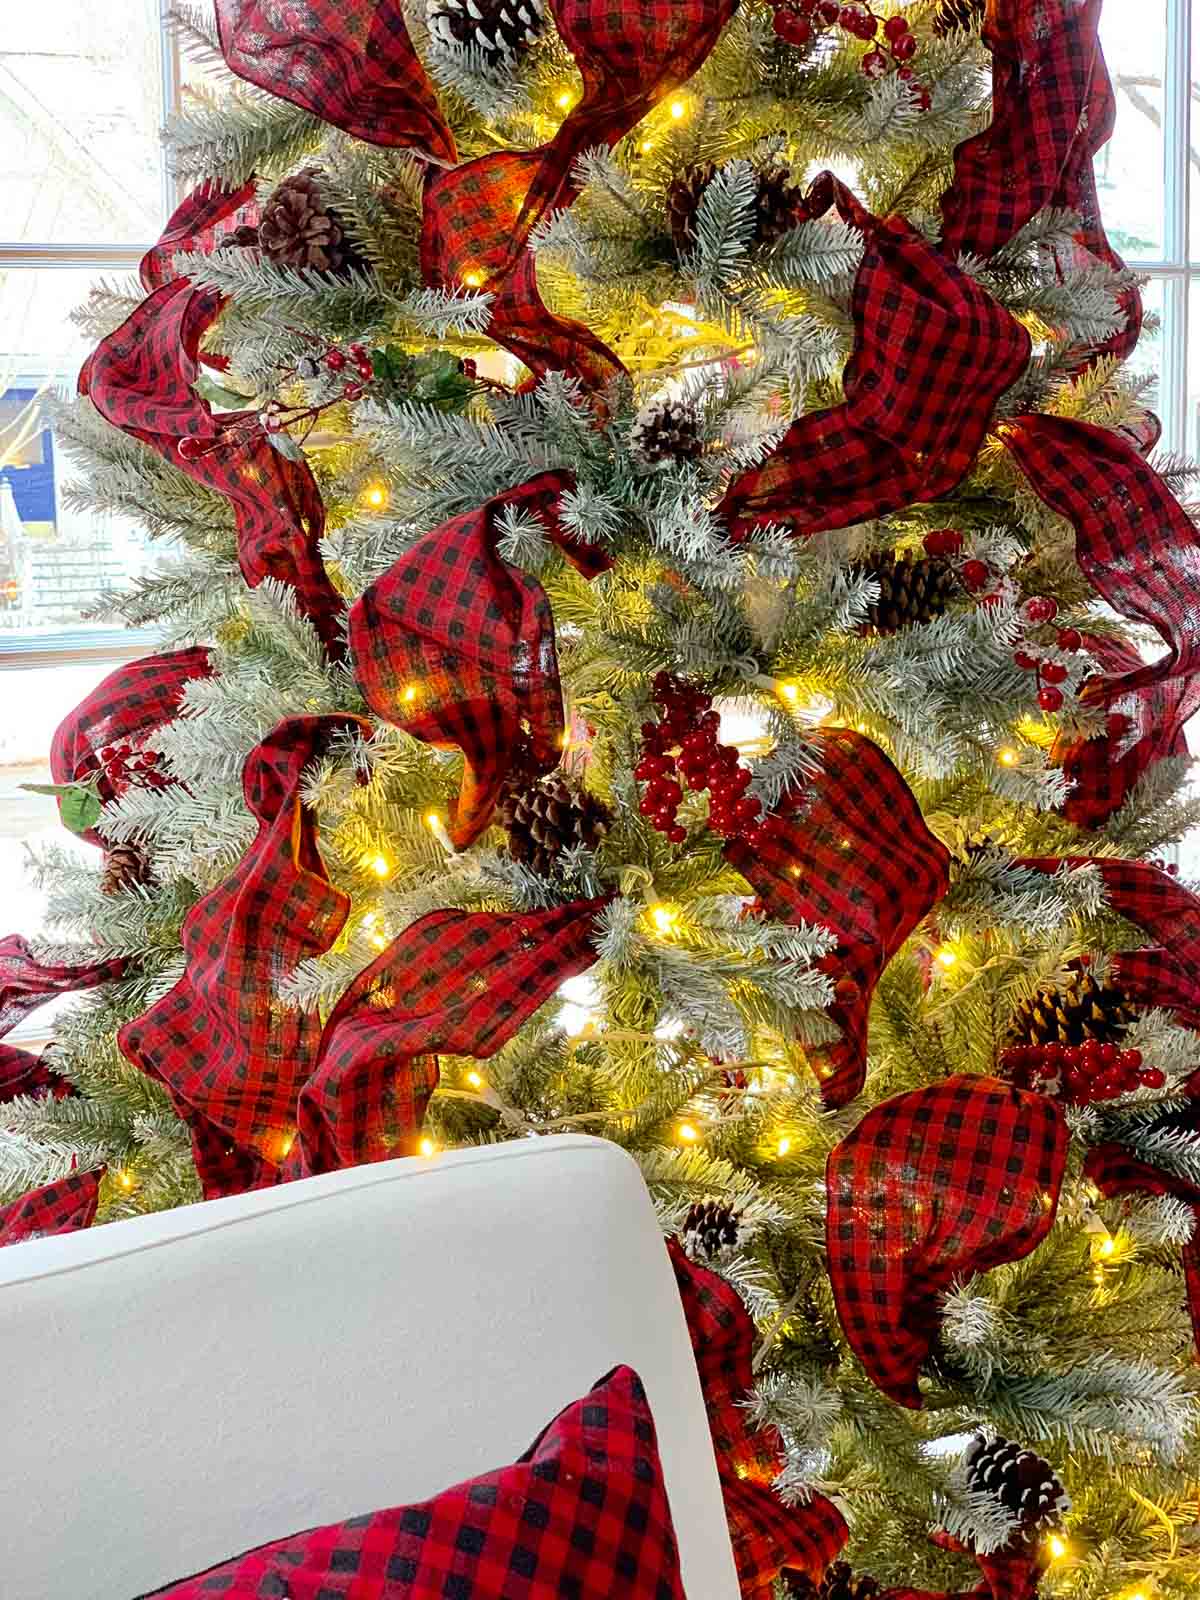 white christmas tree red ribbons white chairs red pillows #christmasdecorating #christmastree